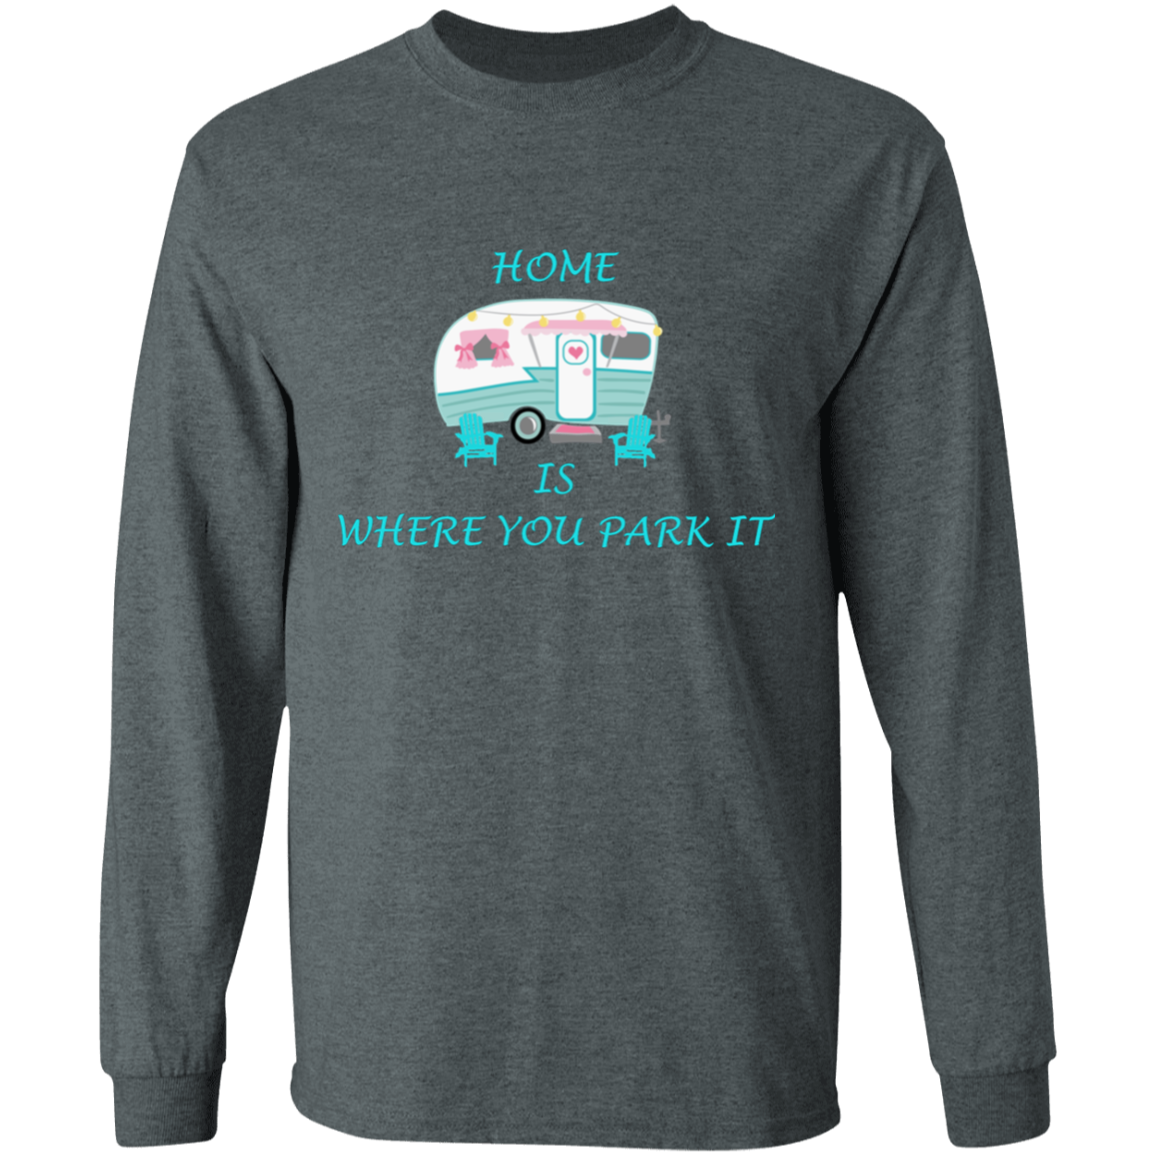 home is where you park it long sleeve t'shirt